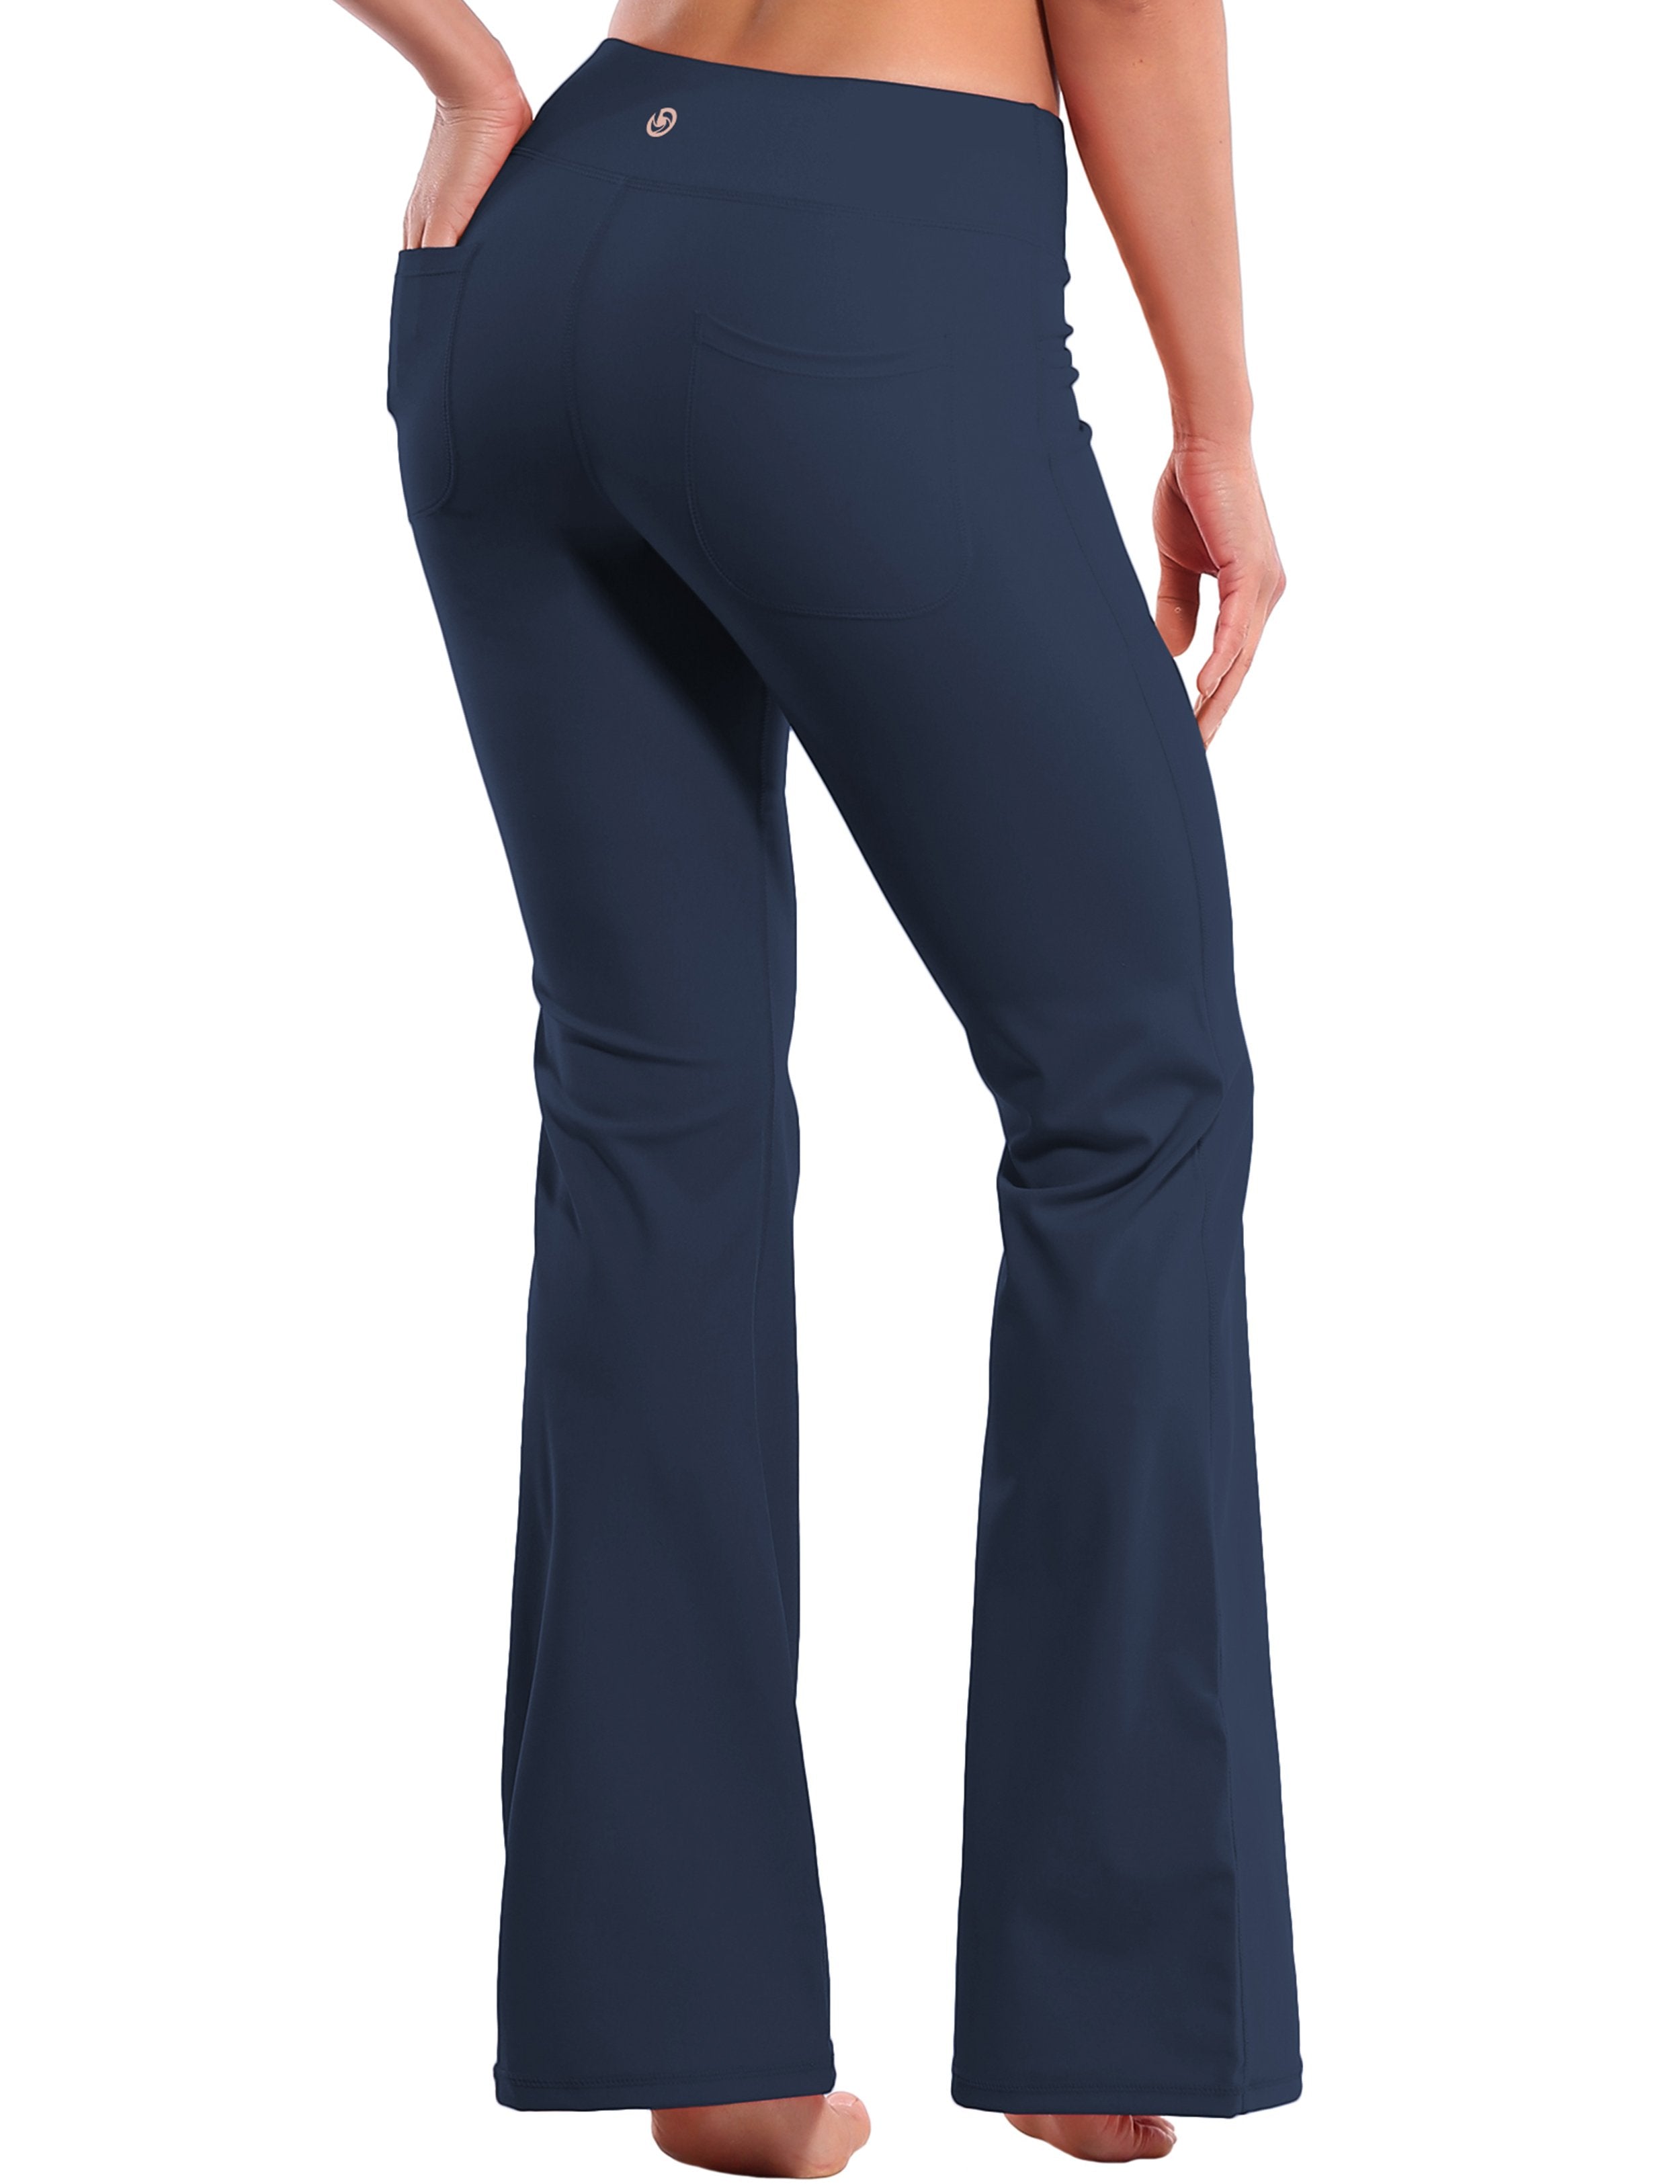 4 Pockets Bootcut Leggings darknavy 75%Nylon/25%Spandex Fabric doesn't attract lint easily 4-way stretch No see-through Moisture-wicking Inner pocket Four lengths